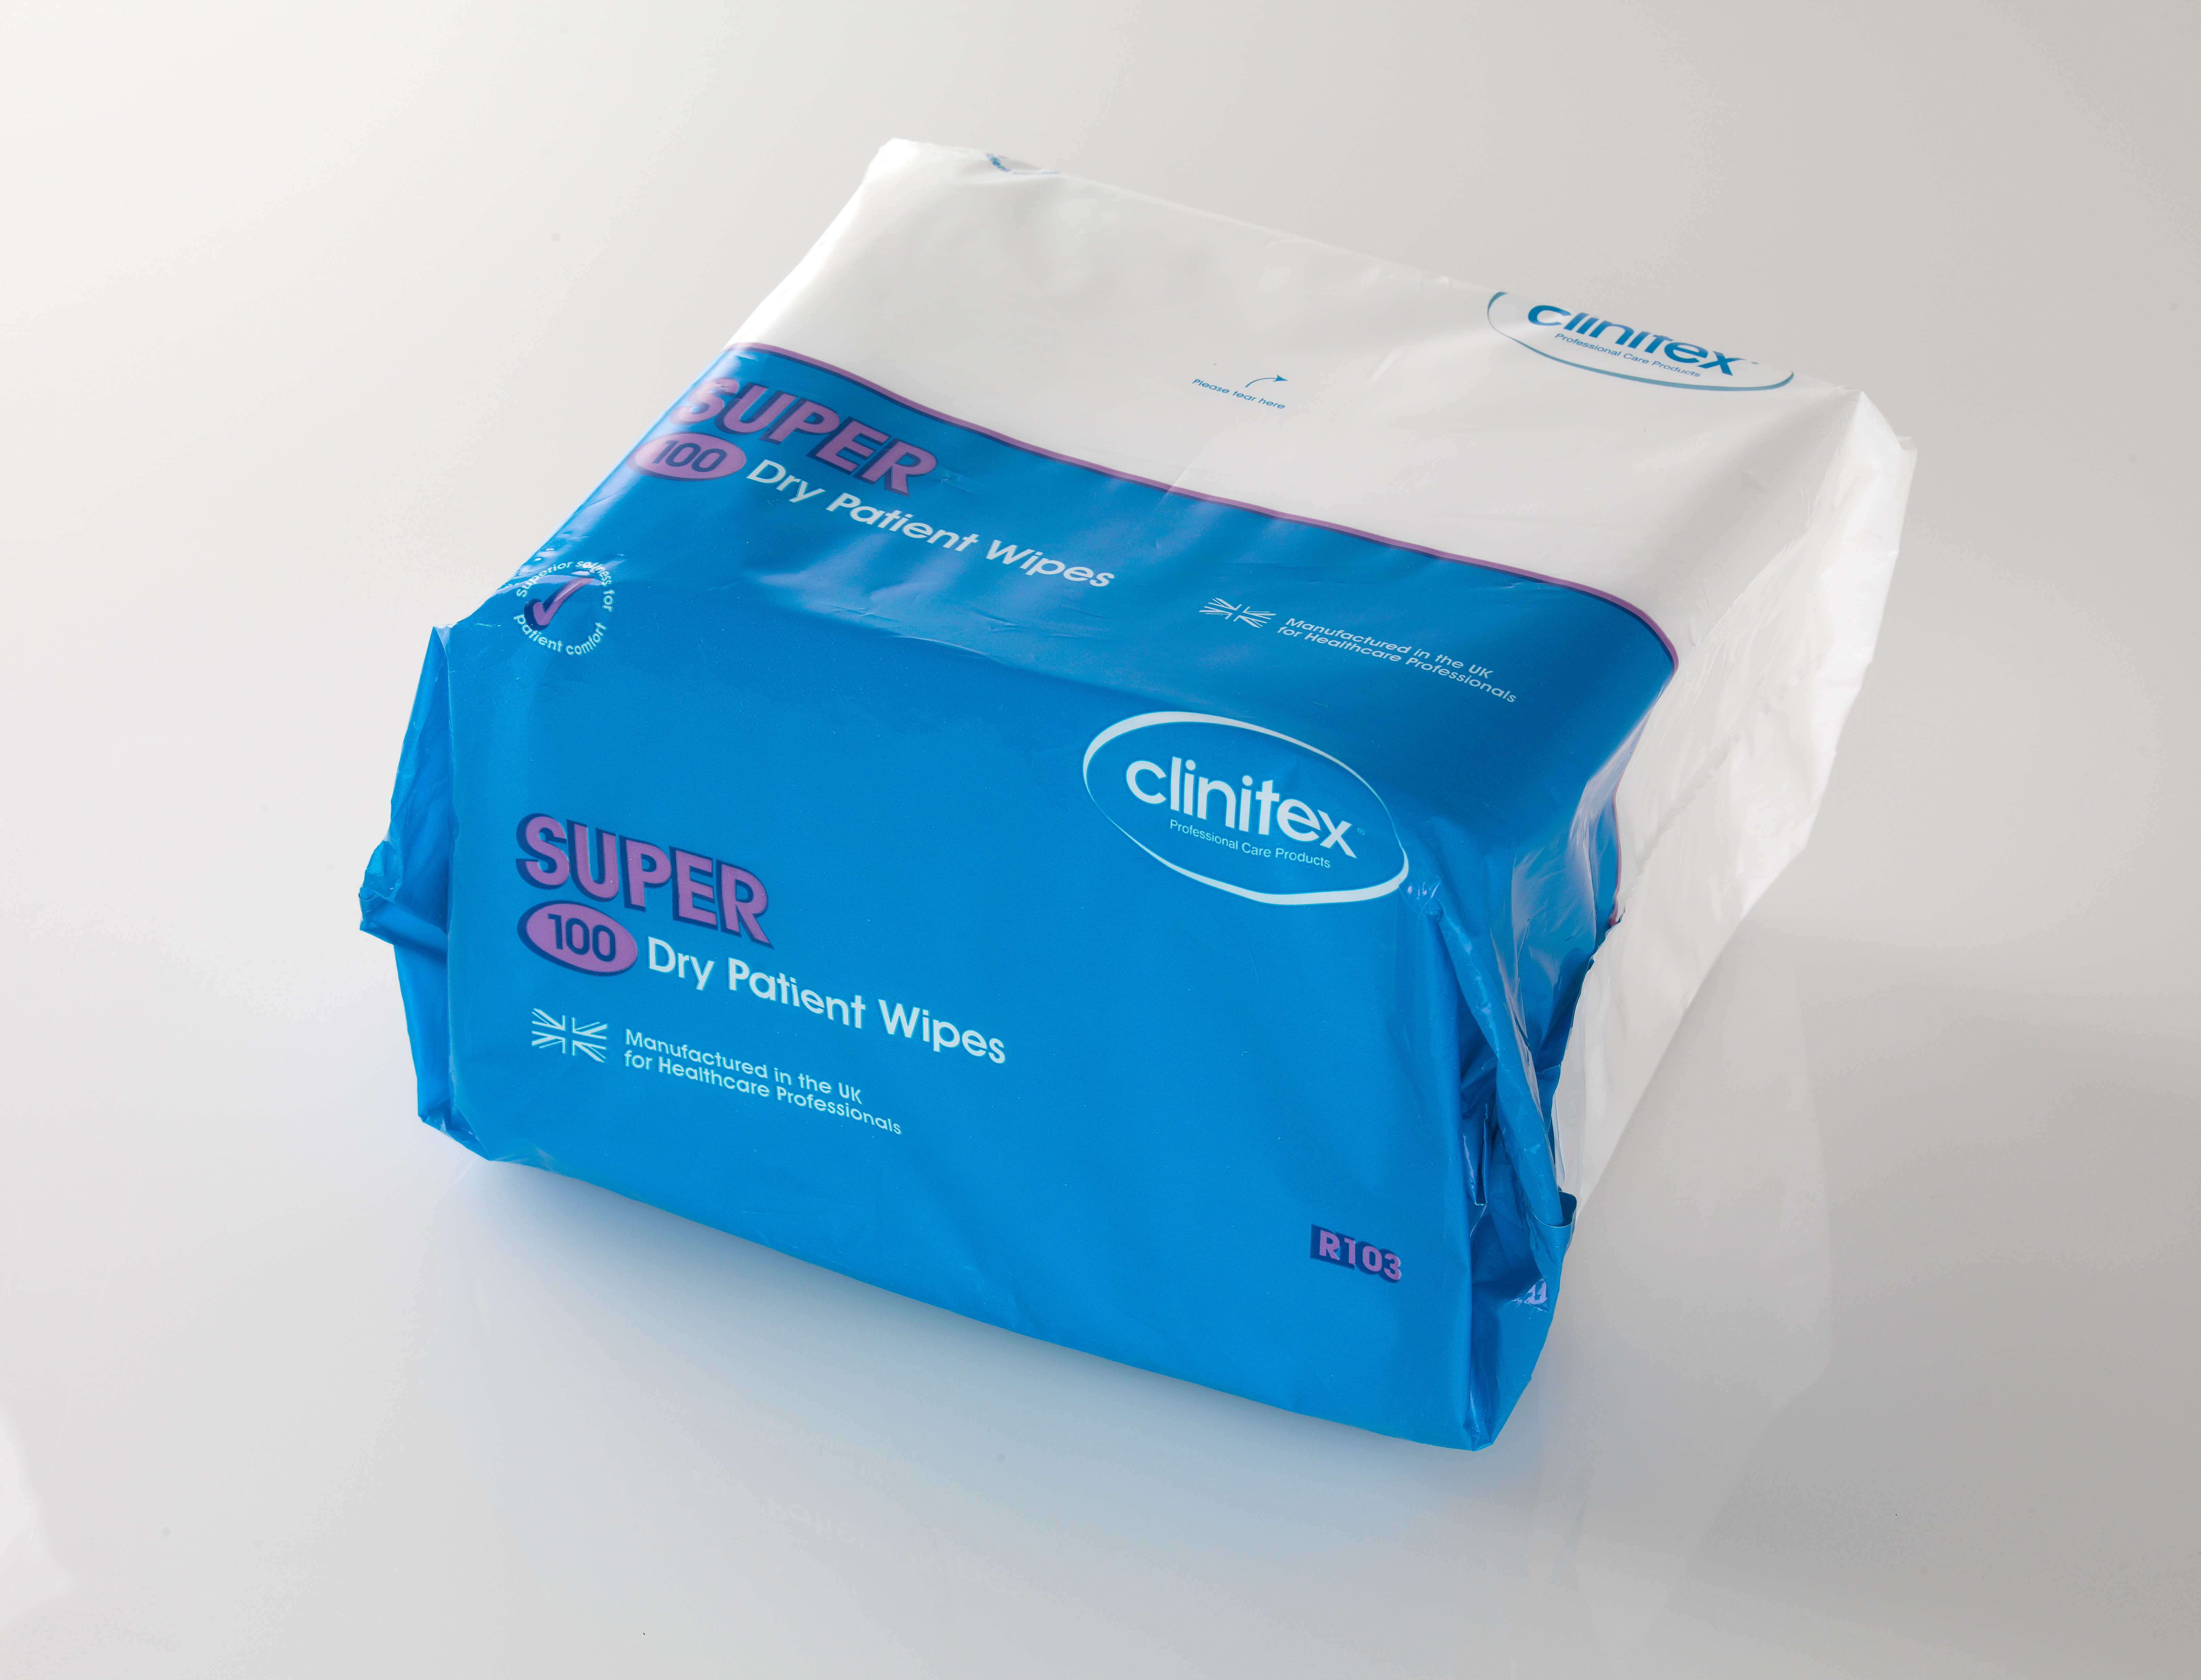 Polydry Wipes - Super